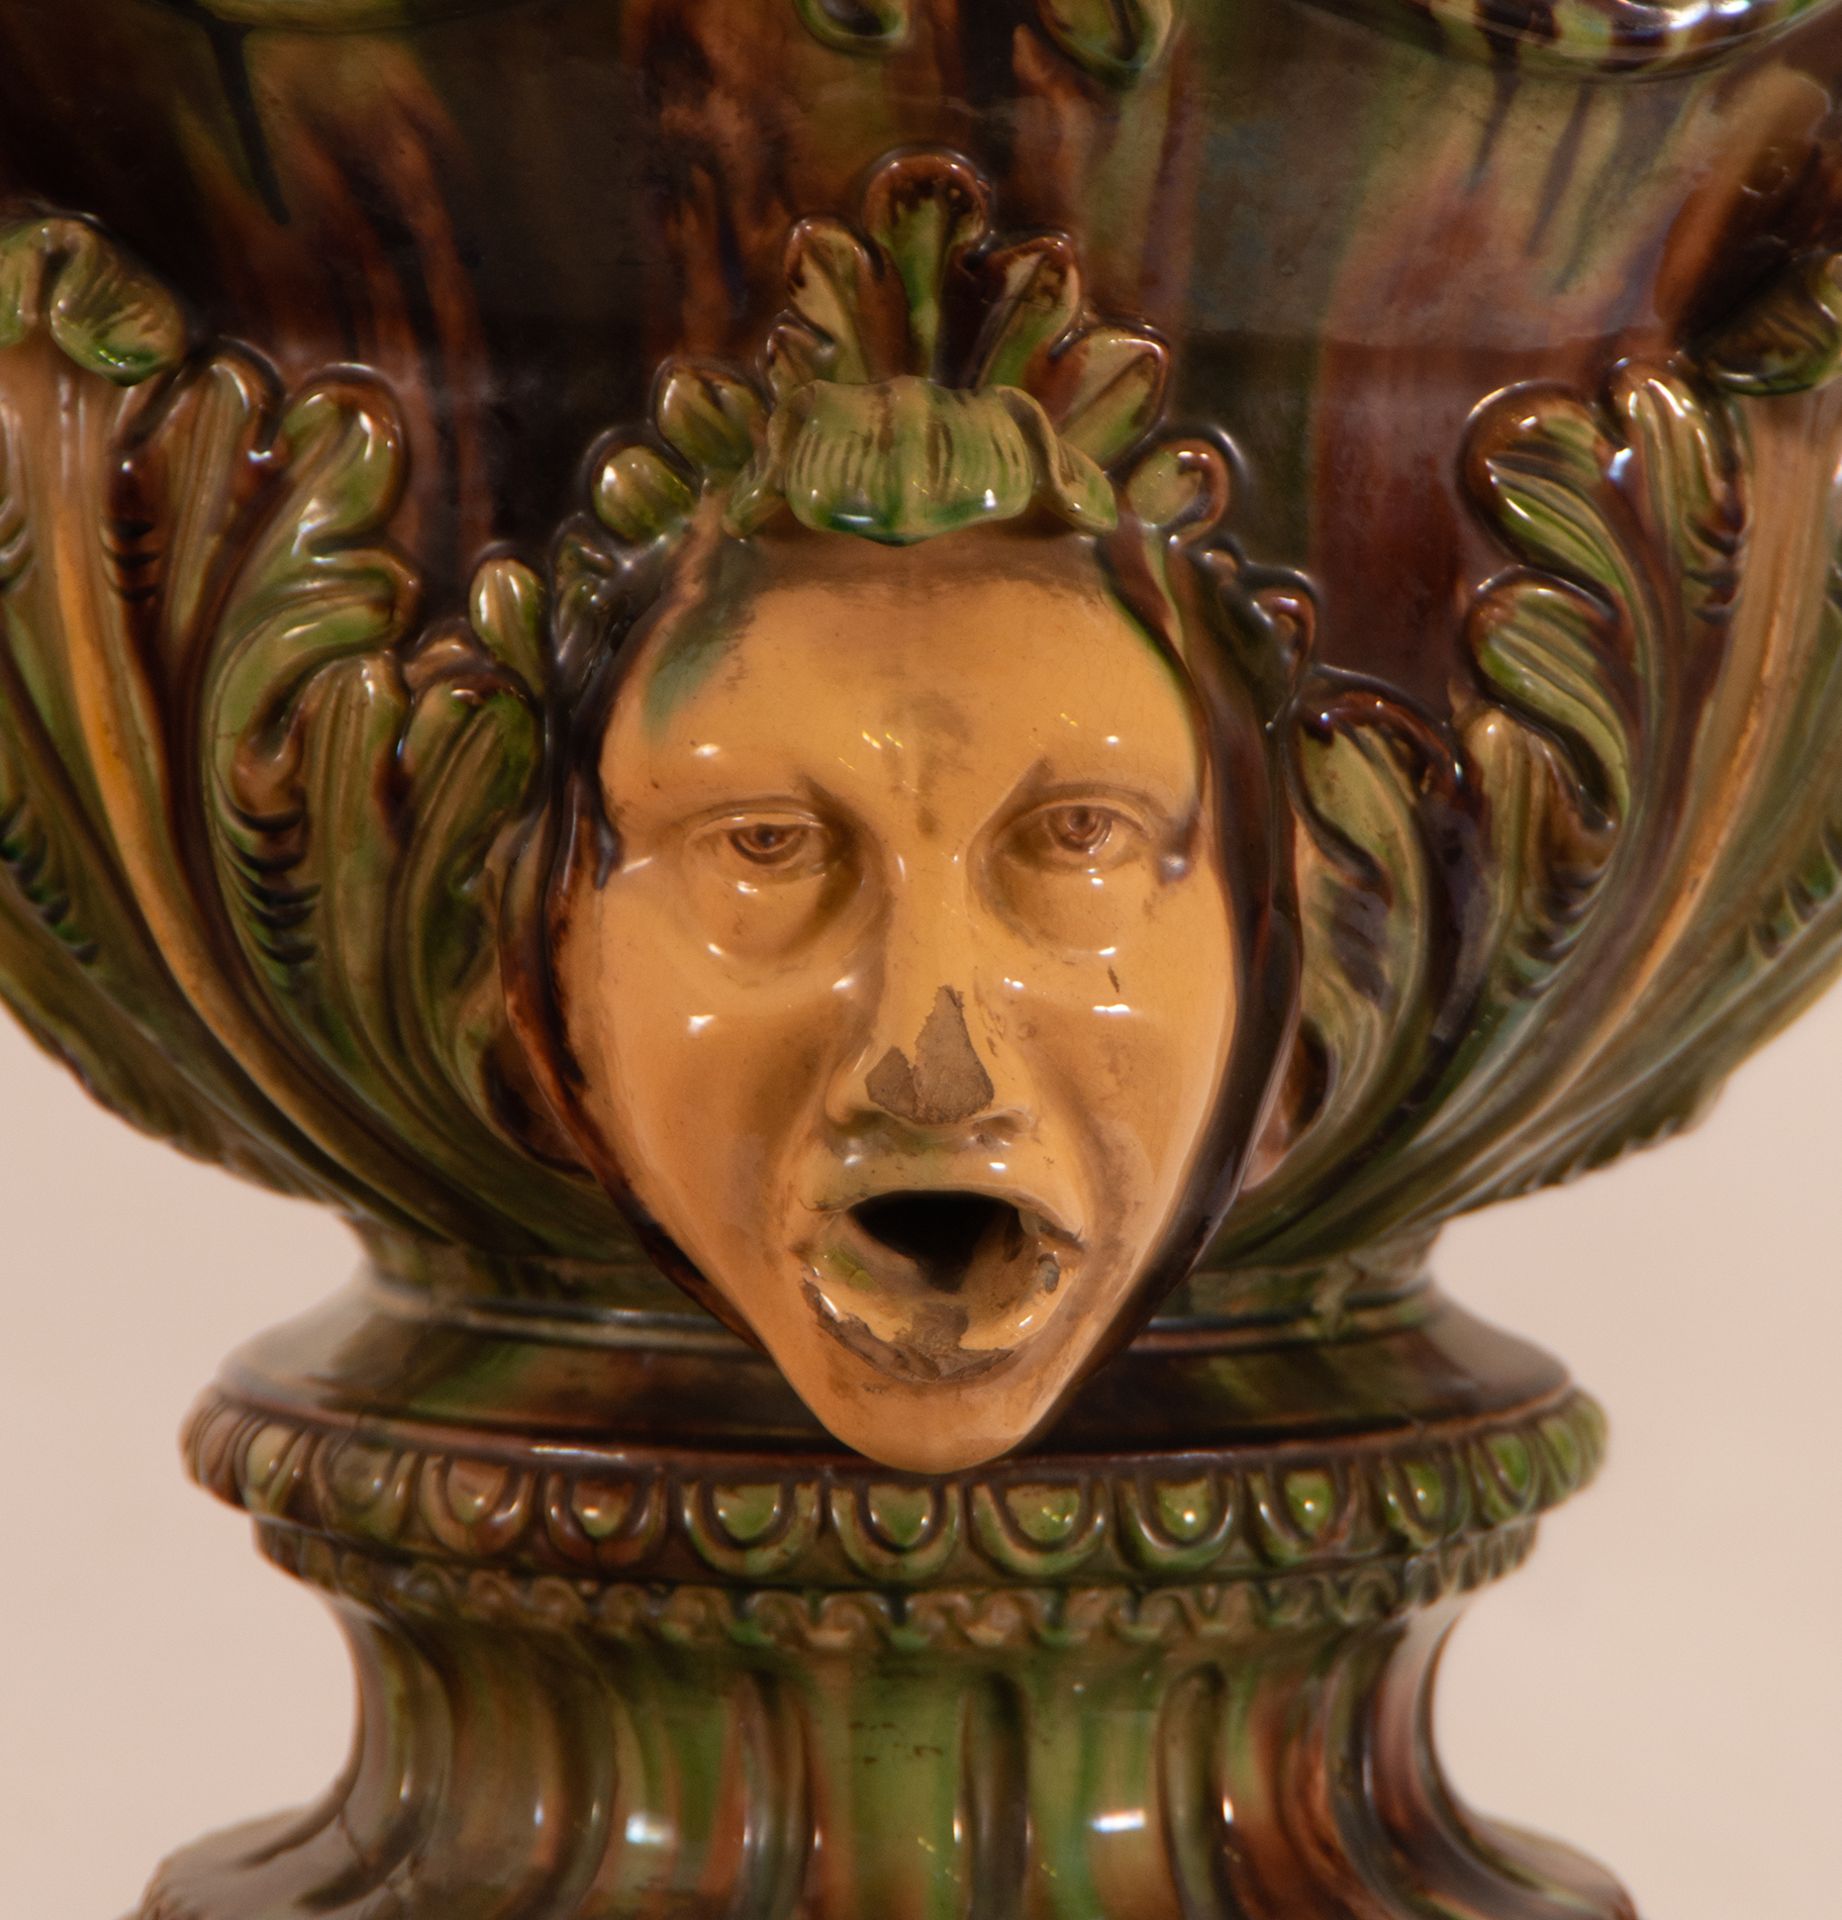 Ewer in enameled stoneware in the Art Nouveau style, French or Italian school of the 19th - 20th cen - Image 11 of 11